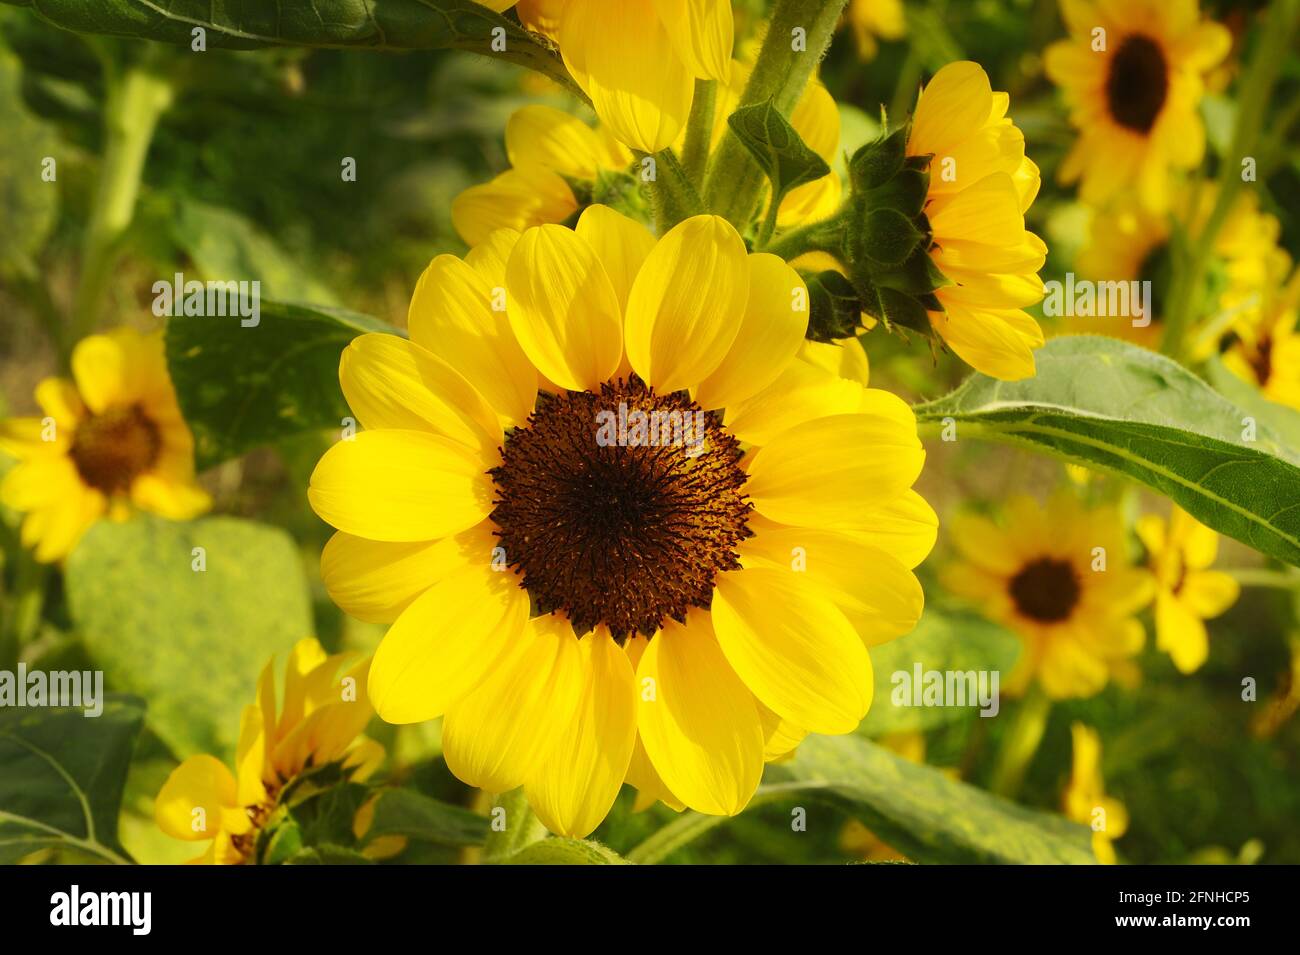 sunflower is blooming in the garden Stock Photo